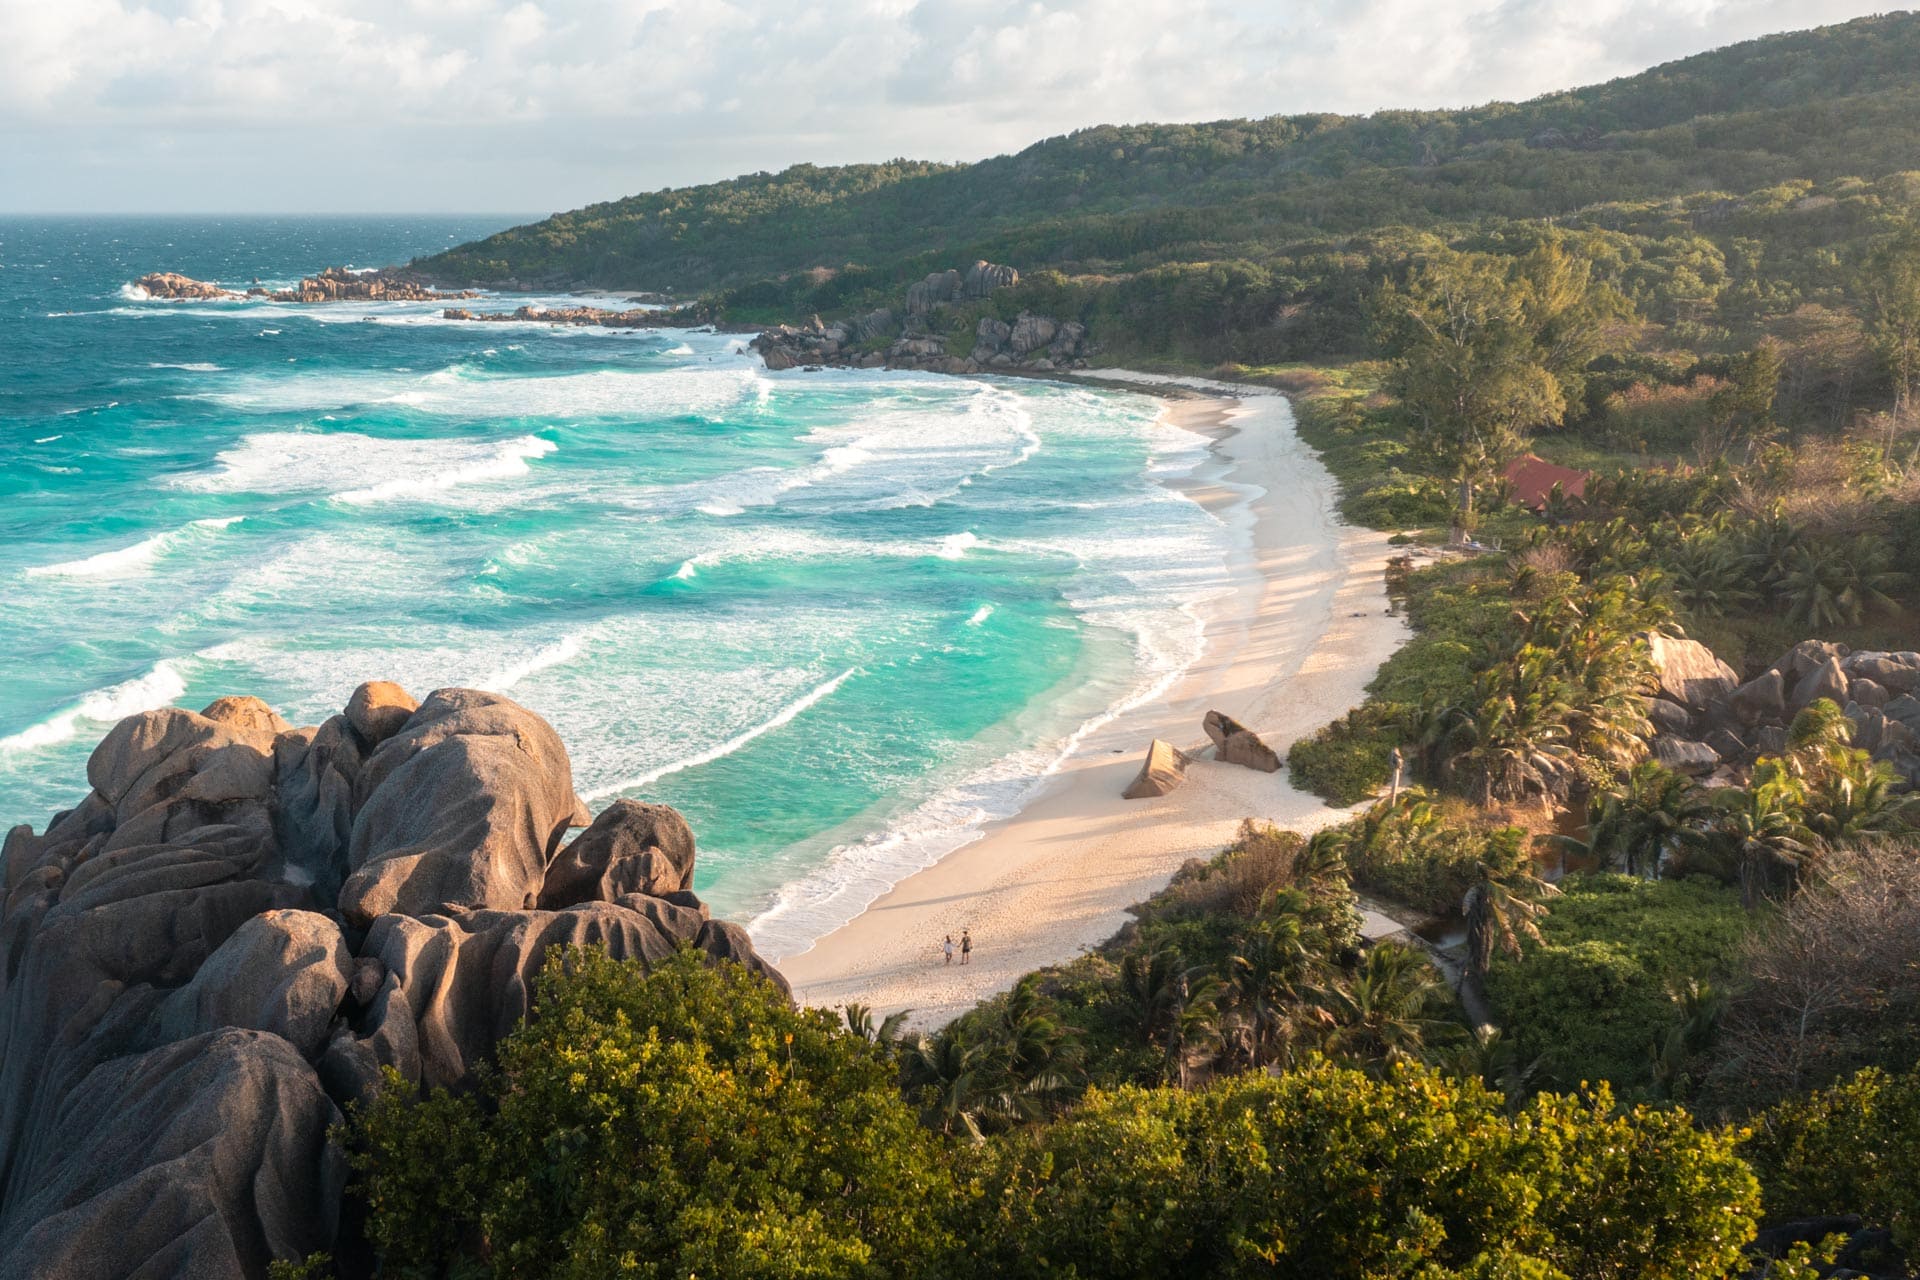 Where to Stay on La Digue, Seychelles: 7 Best Hotels & Resorts for All Budgets